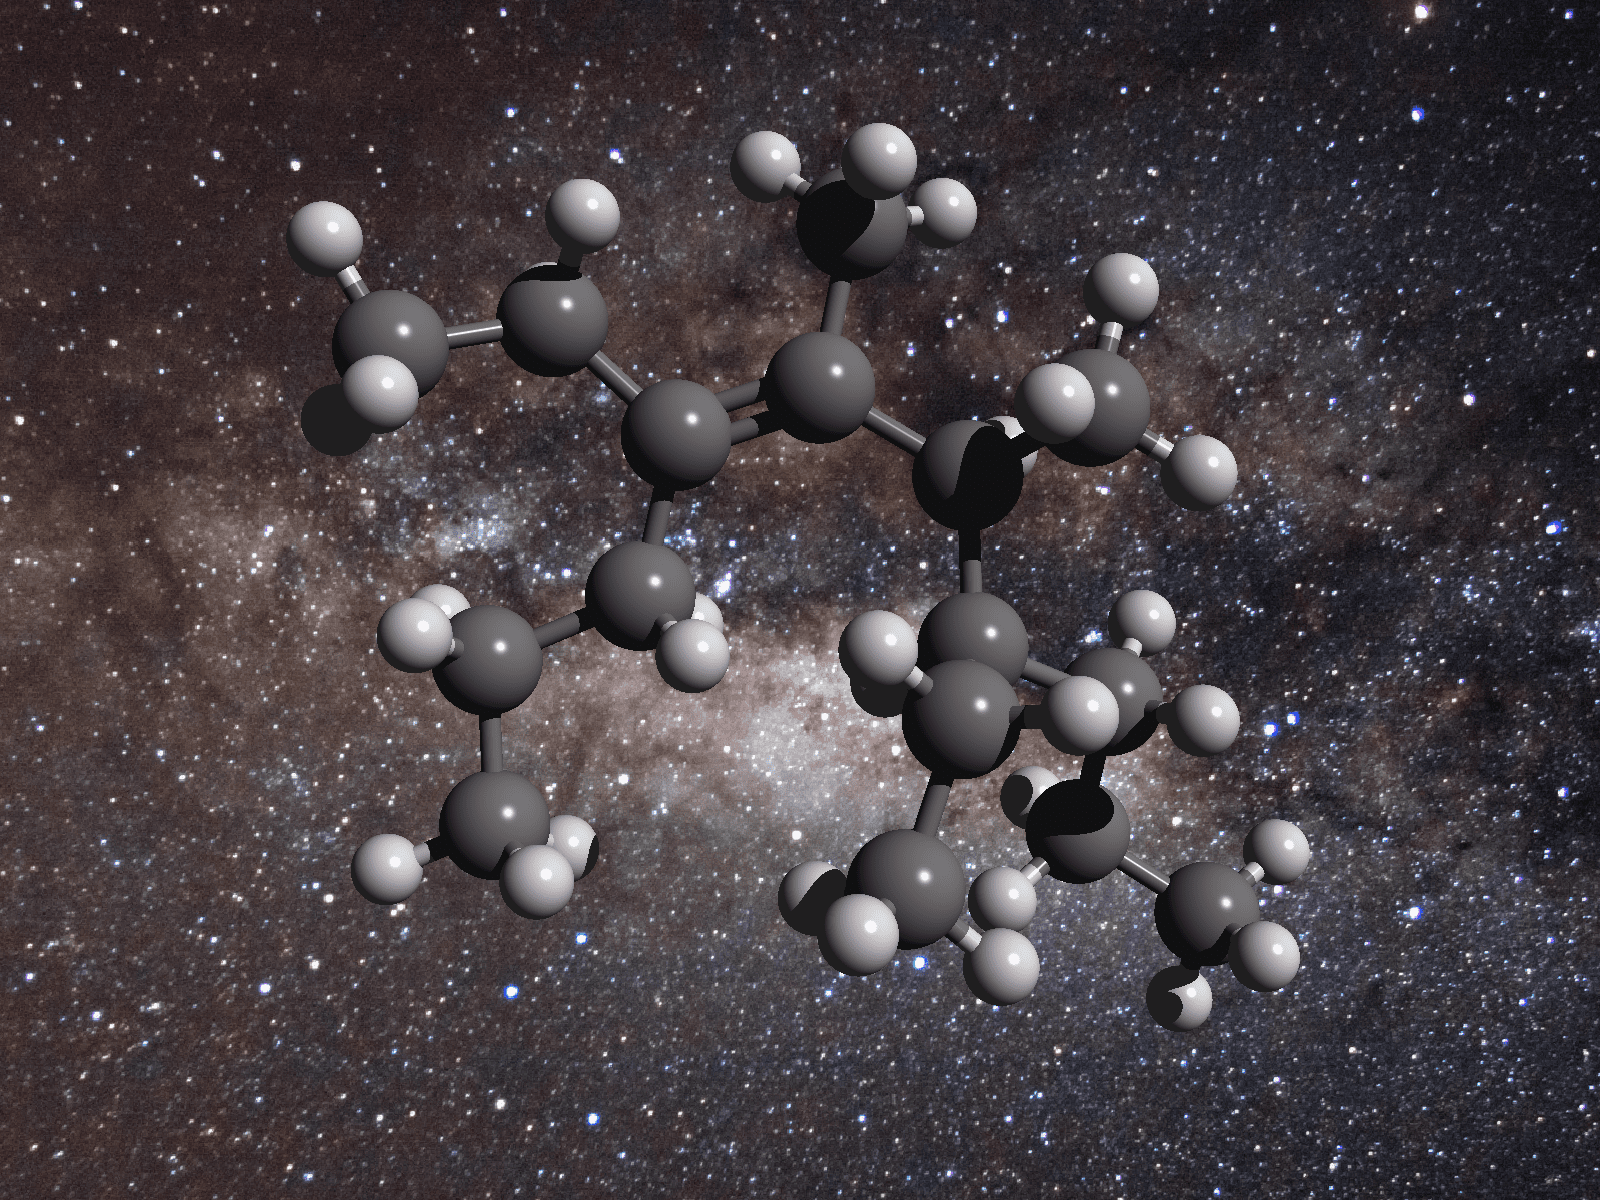 Illustration of the structure of a greasy carbon molecule. In this picture, carbon atoms are colored grey while hydrogen atoms are white spheres. Credit: Royal Astronomical Society.